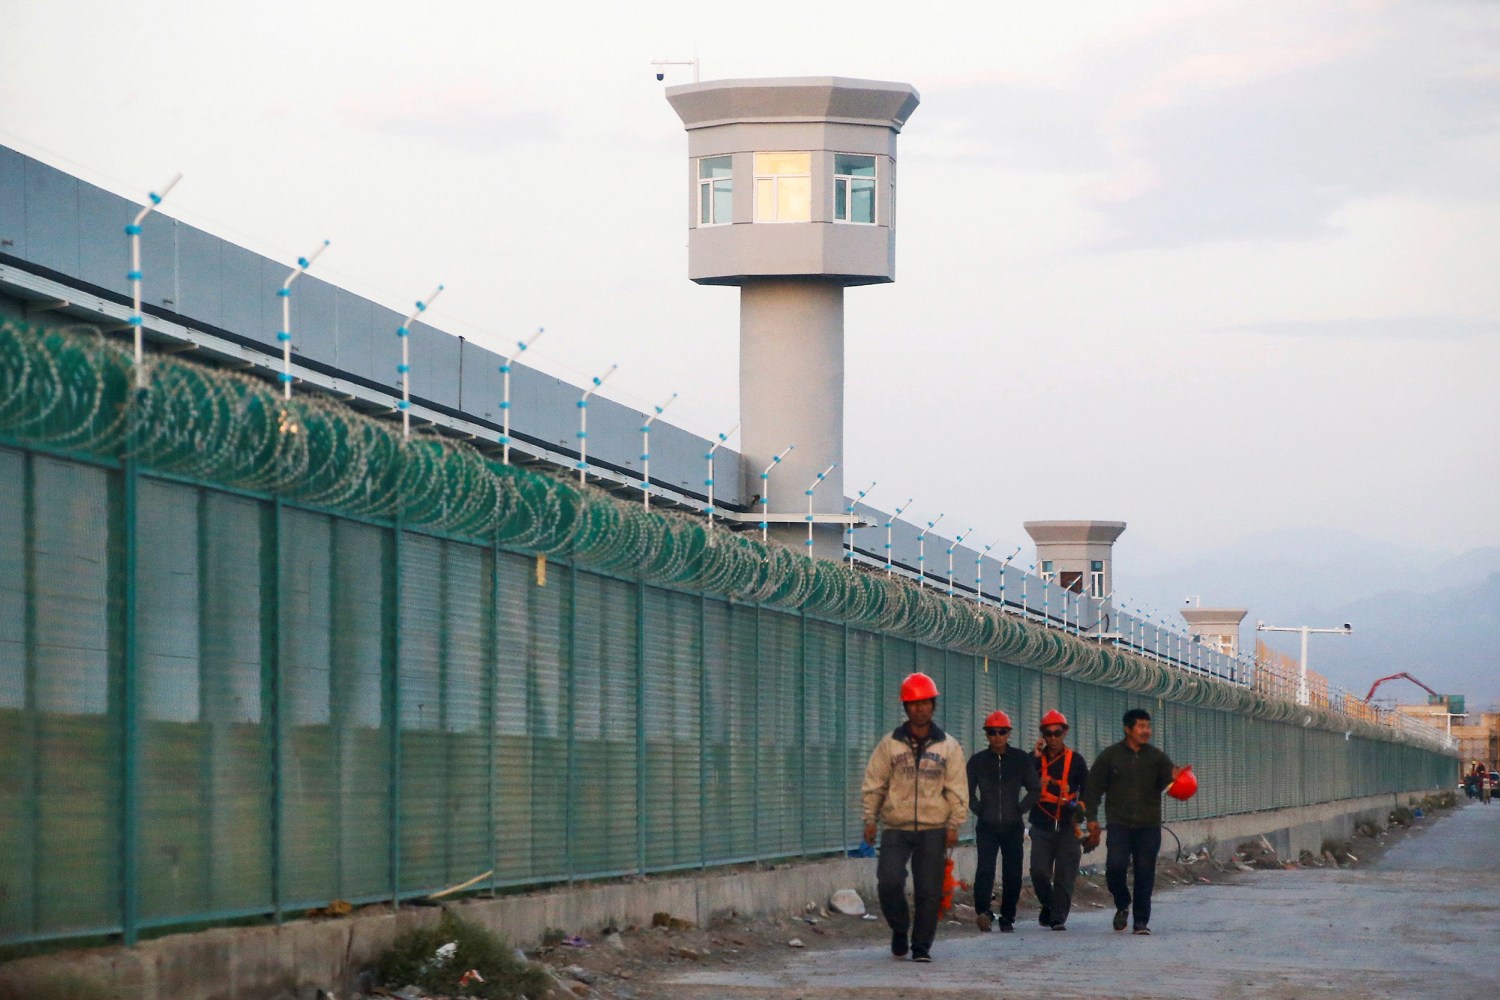 Workers walk by the perimeter fence of what is officially known as a vocational skills education centre in Dabancheng in Xinjiang Uyghur Autonomous Region, China.